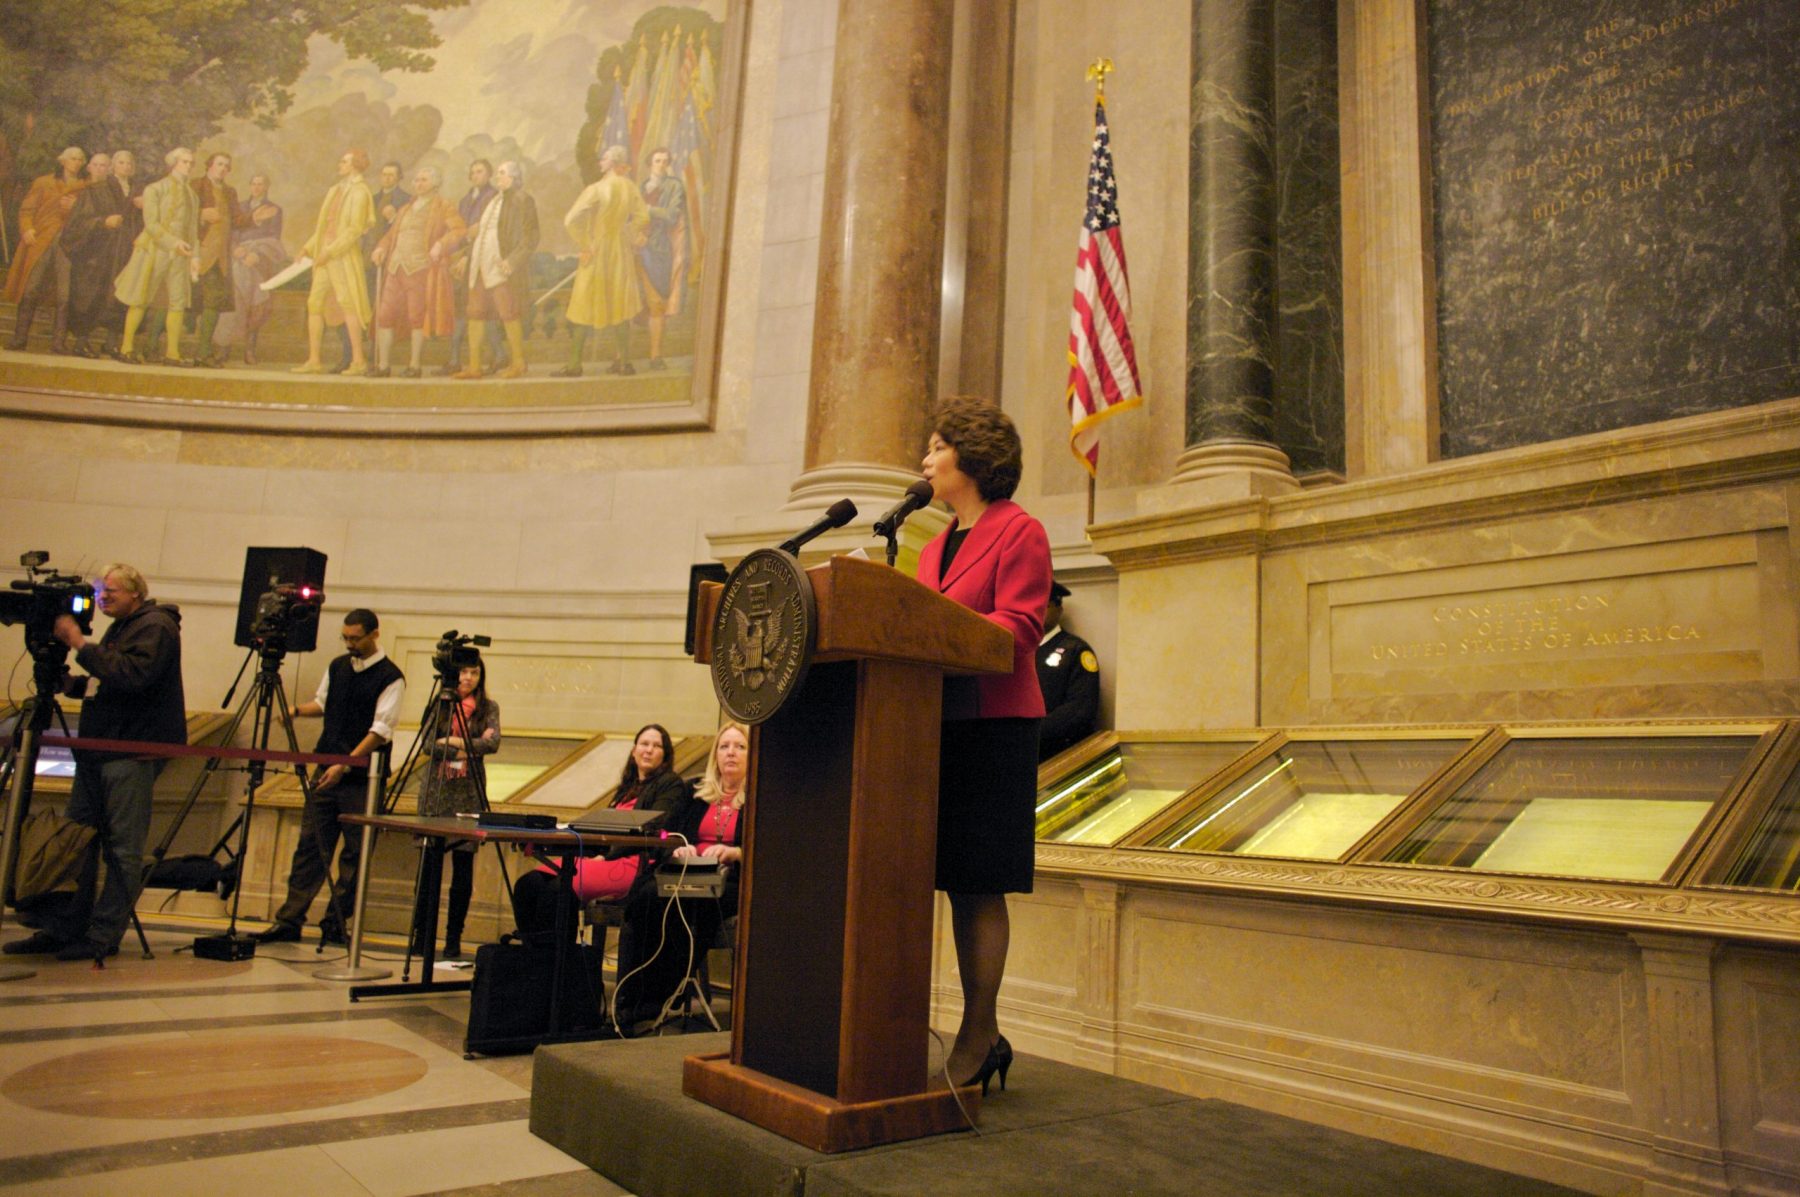 The Honorable Elaine Chao delivers keynote remarks at a Naturalization Ceremony at the National Archives.